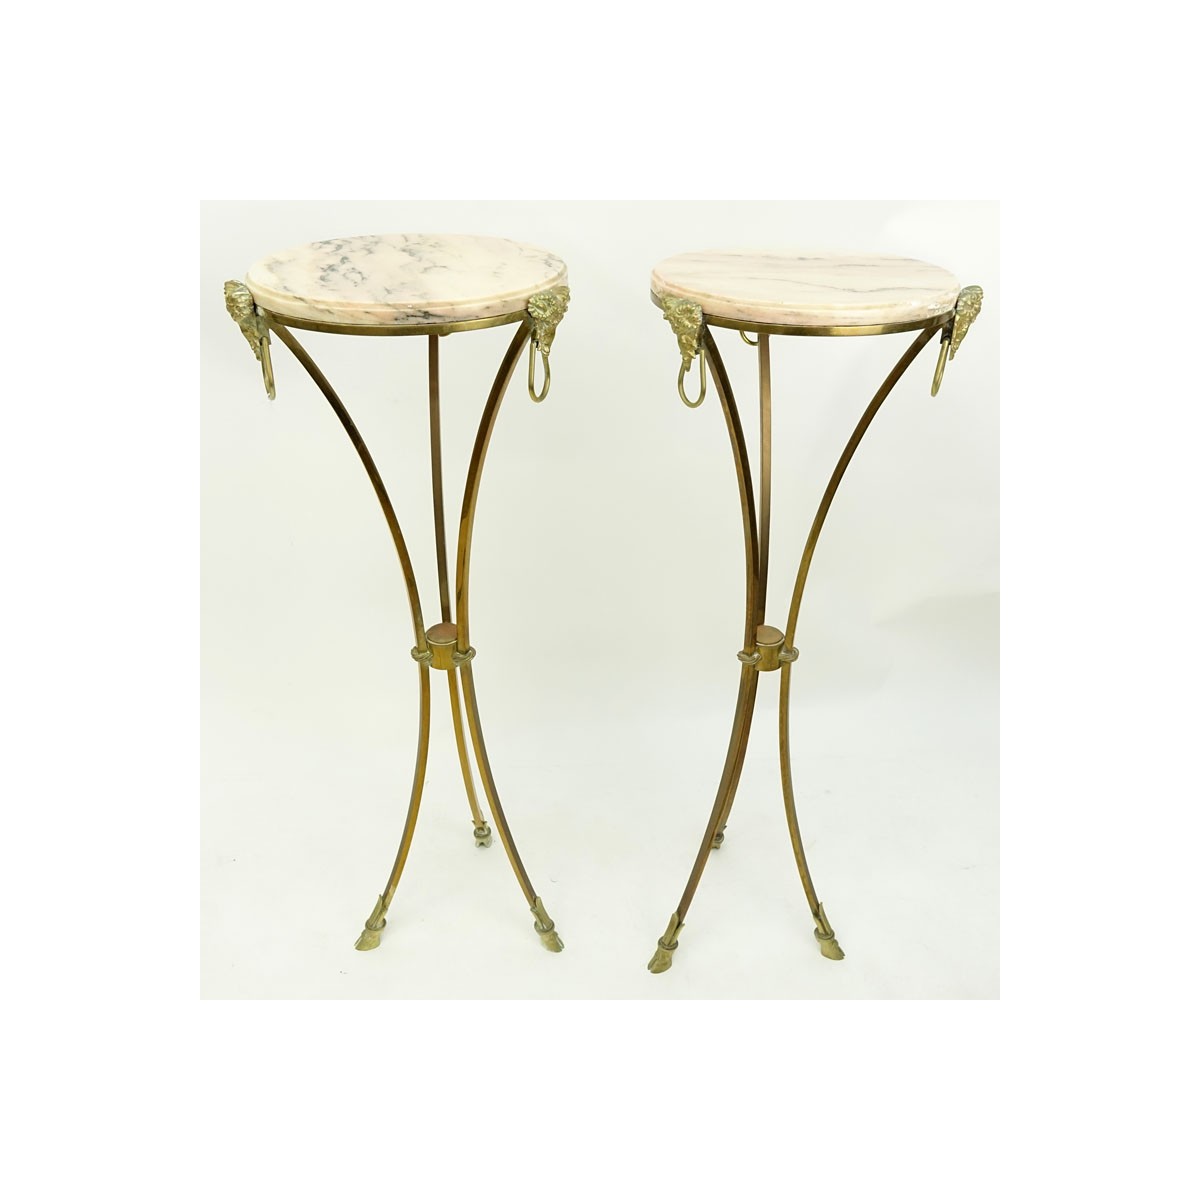 Pair of Marble Top Maison Jansen Style Brass Pedestal Tables. Rams head fittings standing on hoof f